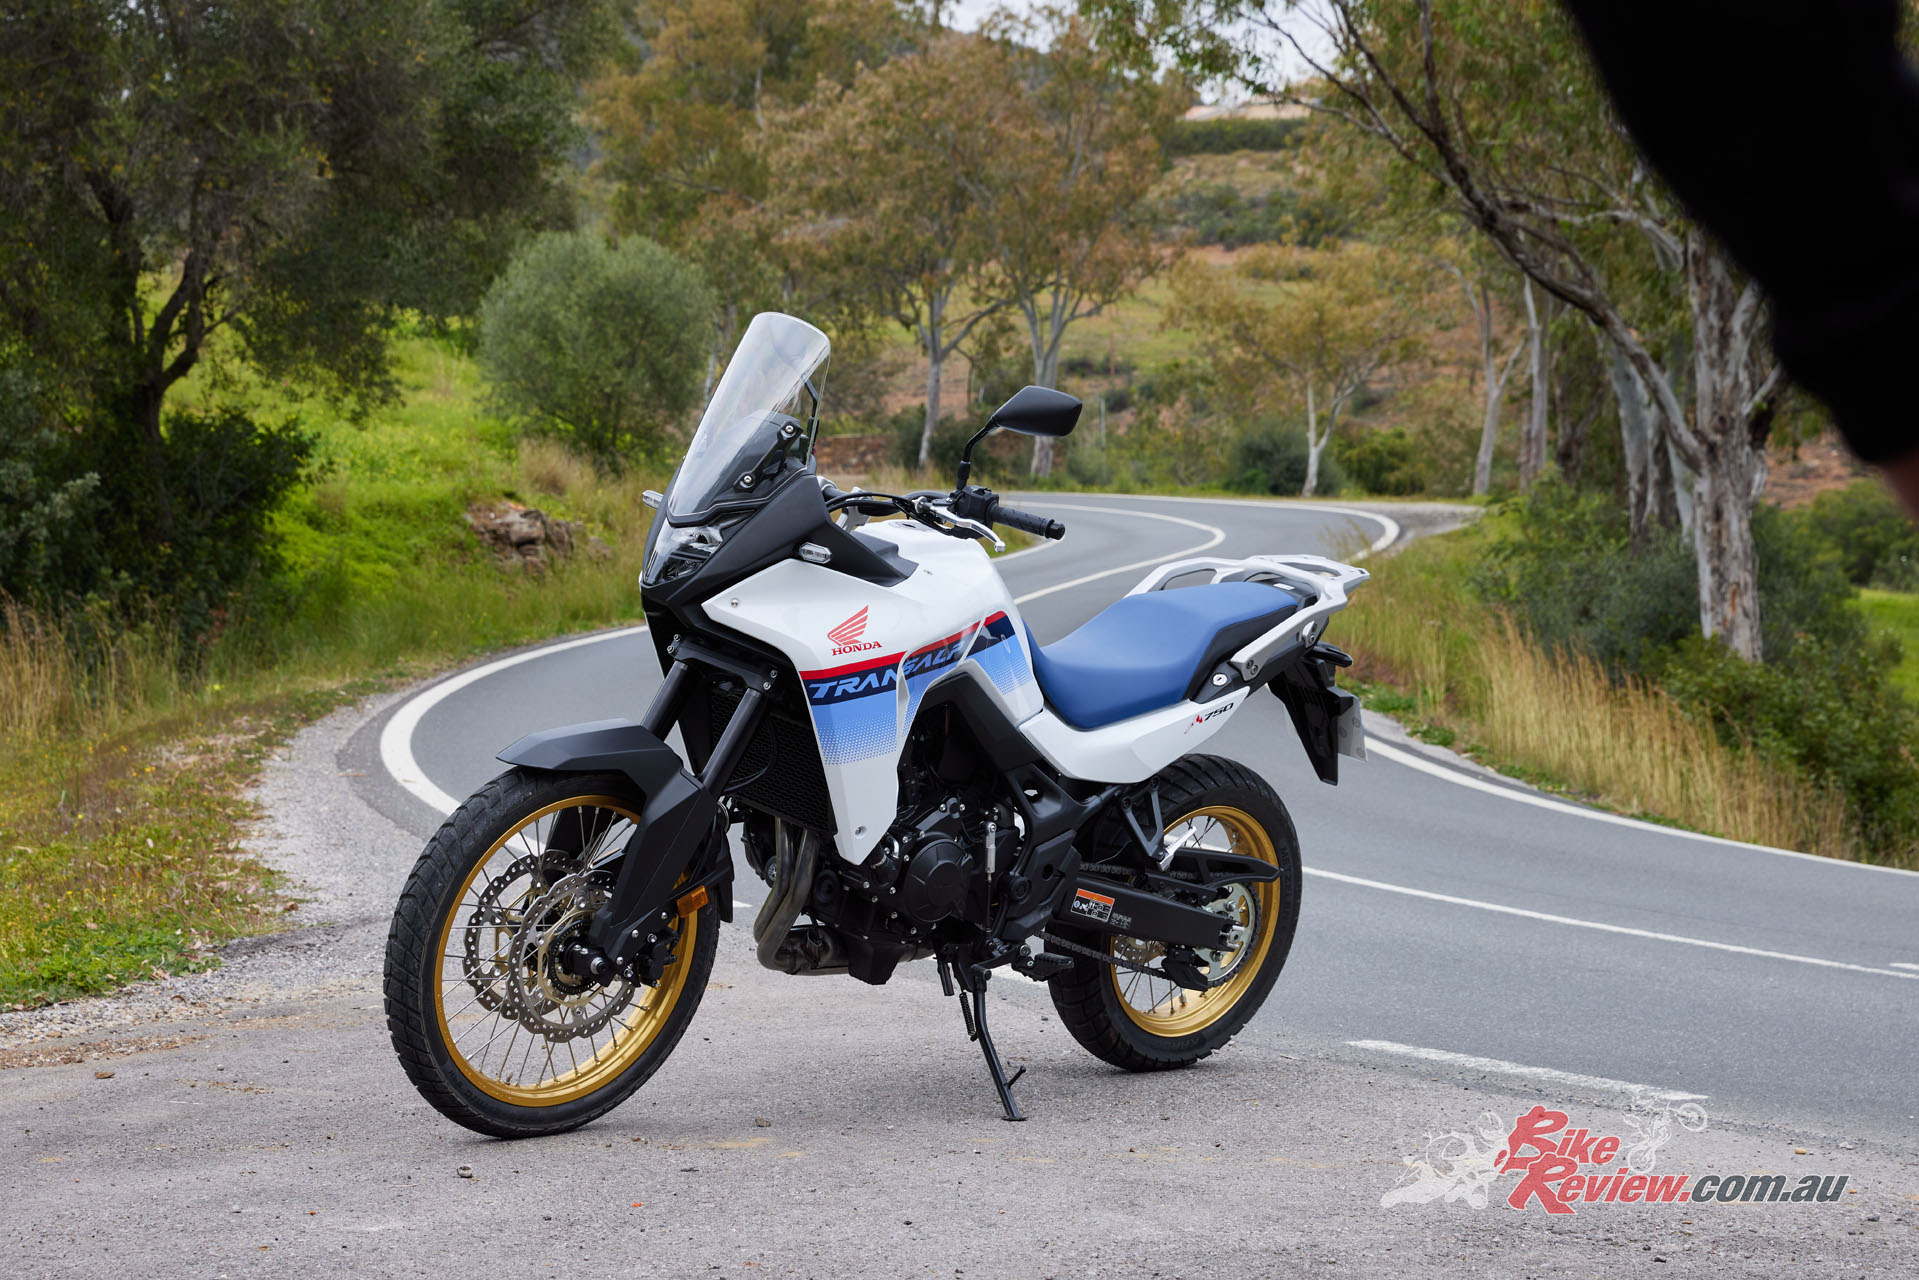 It's going to be a tough choice for customers to decide between the Honda Translap and Suzuki V-STROM 800DE...